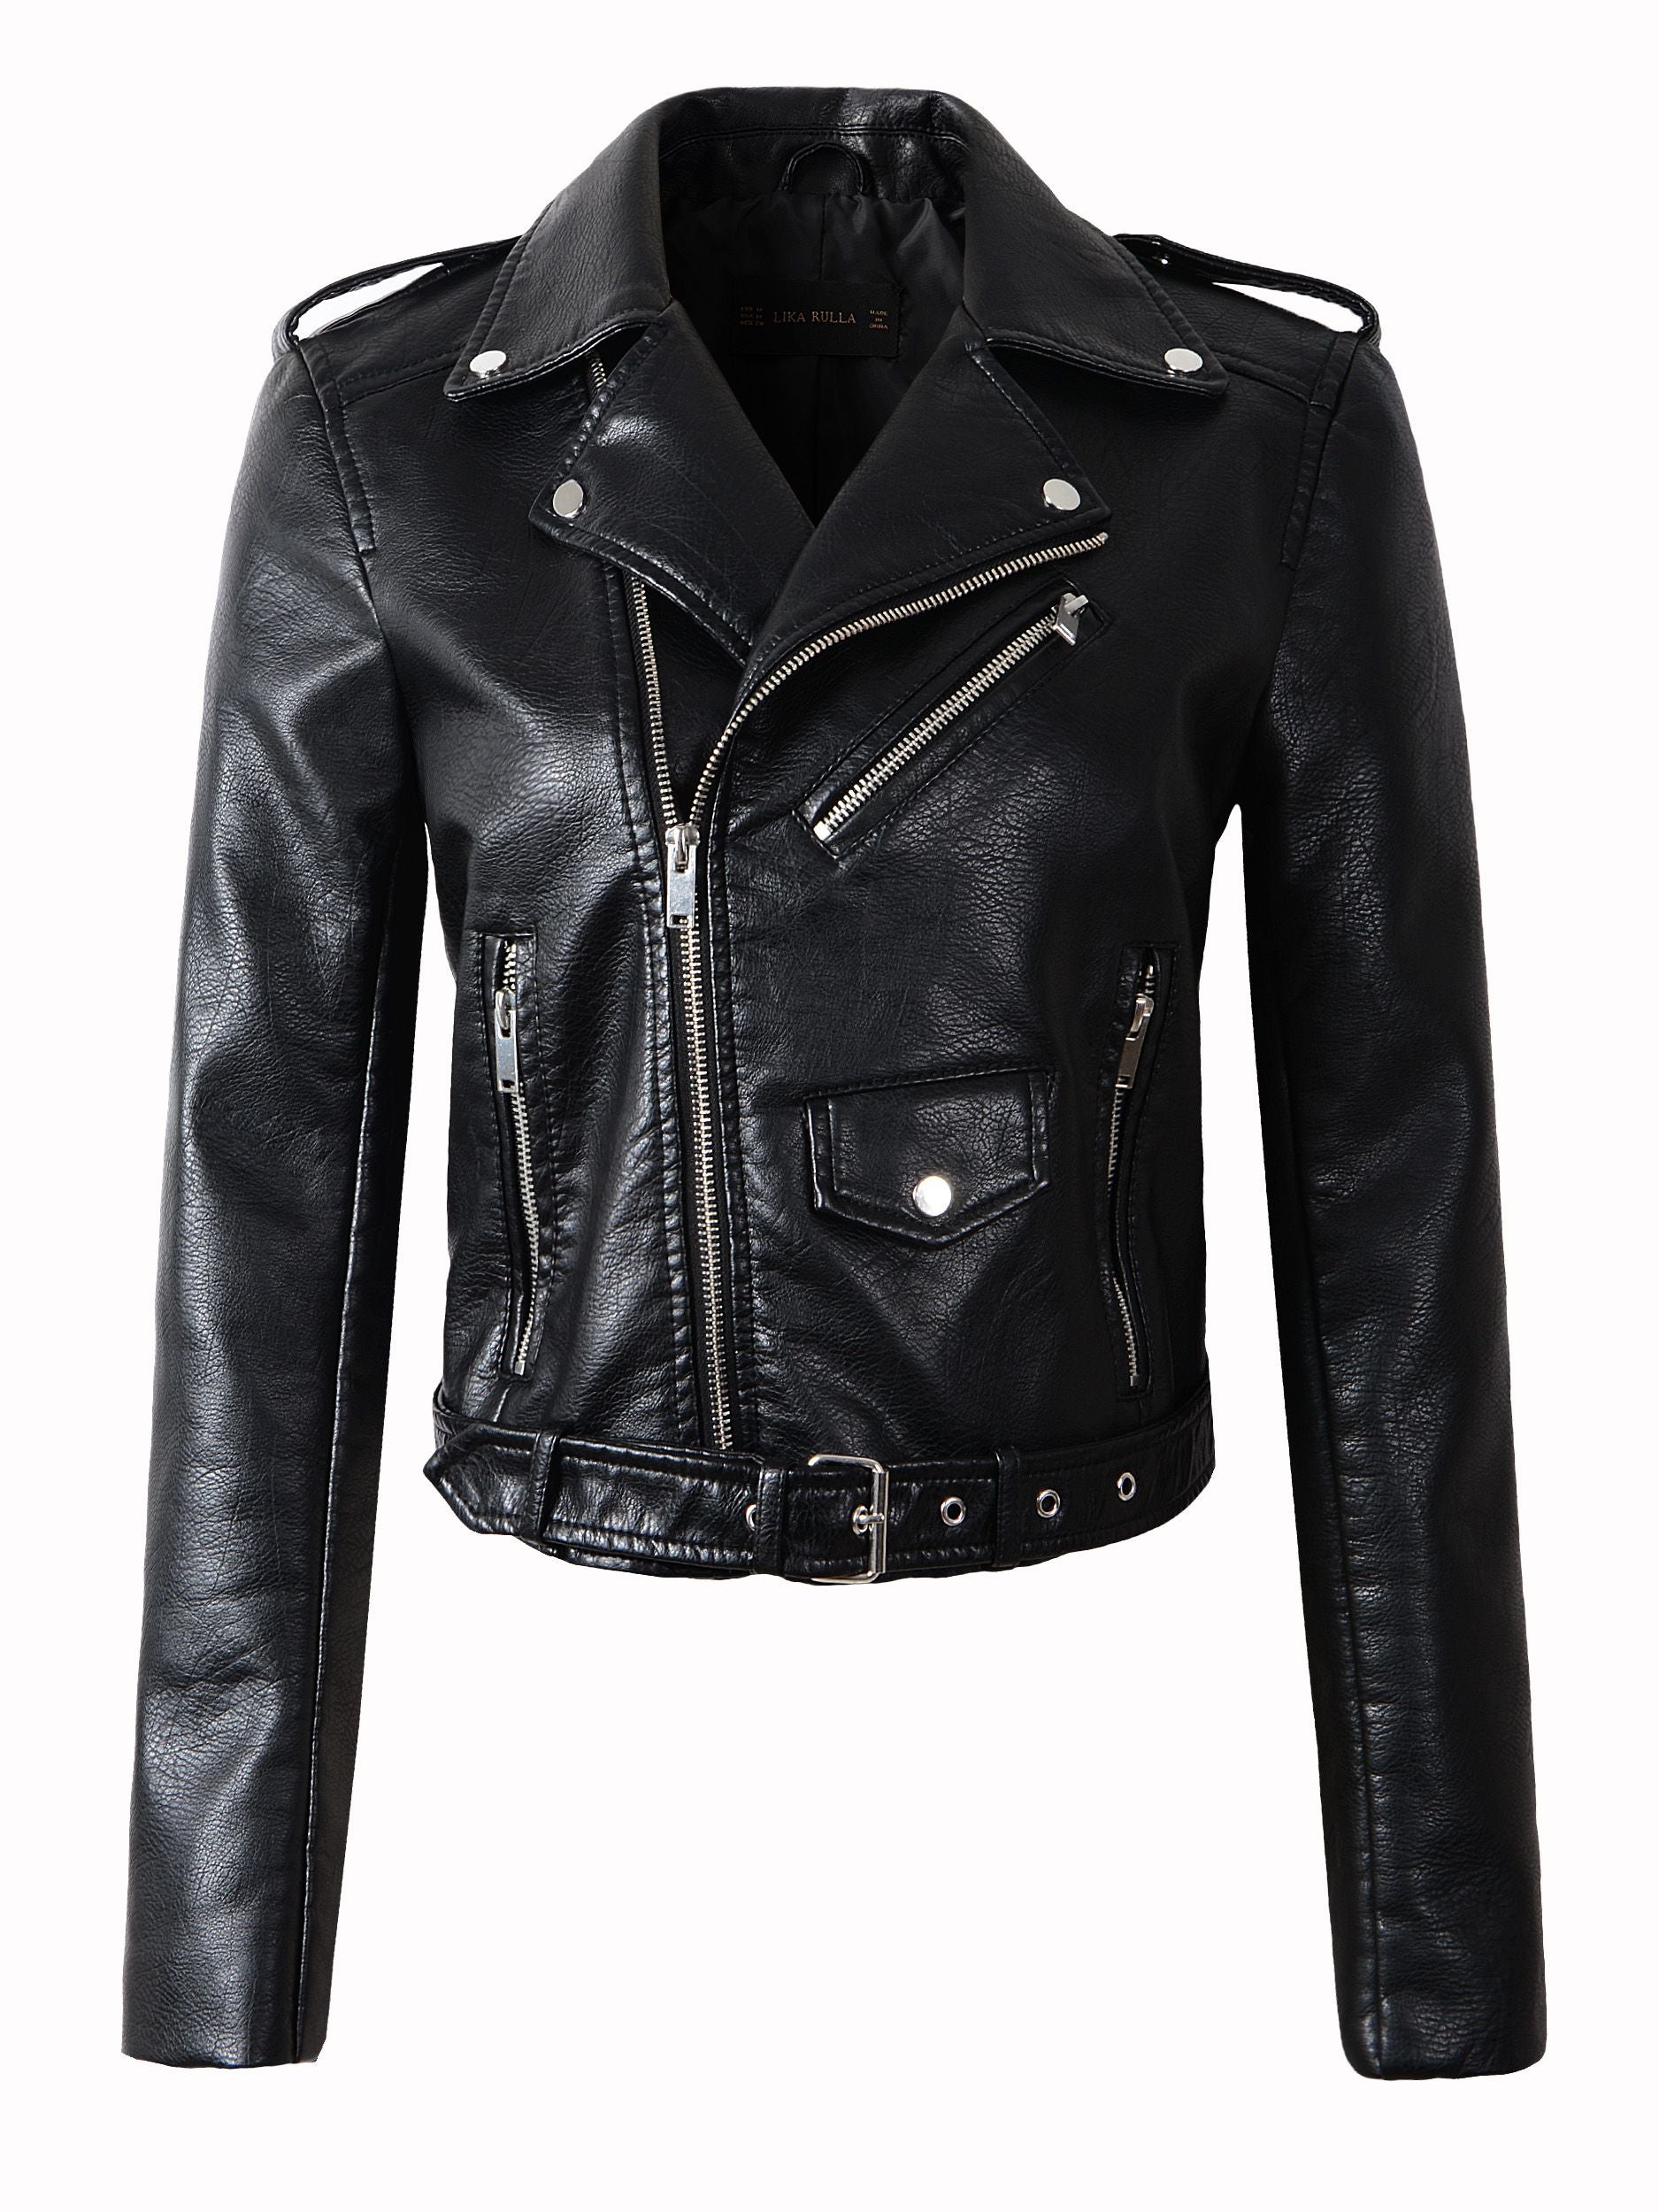 Motorcycle Leather PU Jackets - Forever Growth 